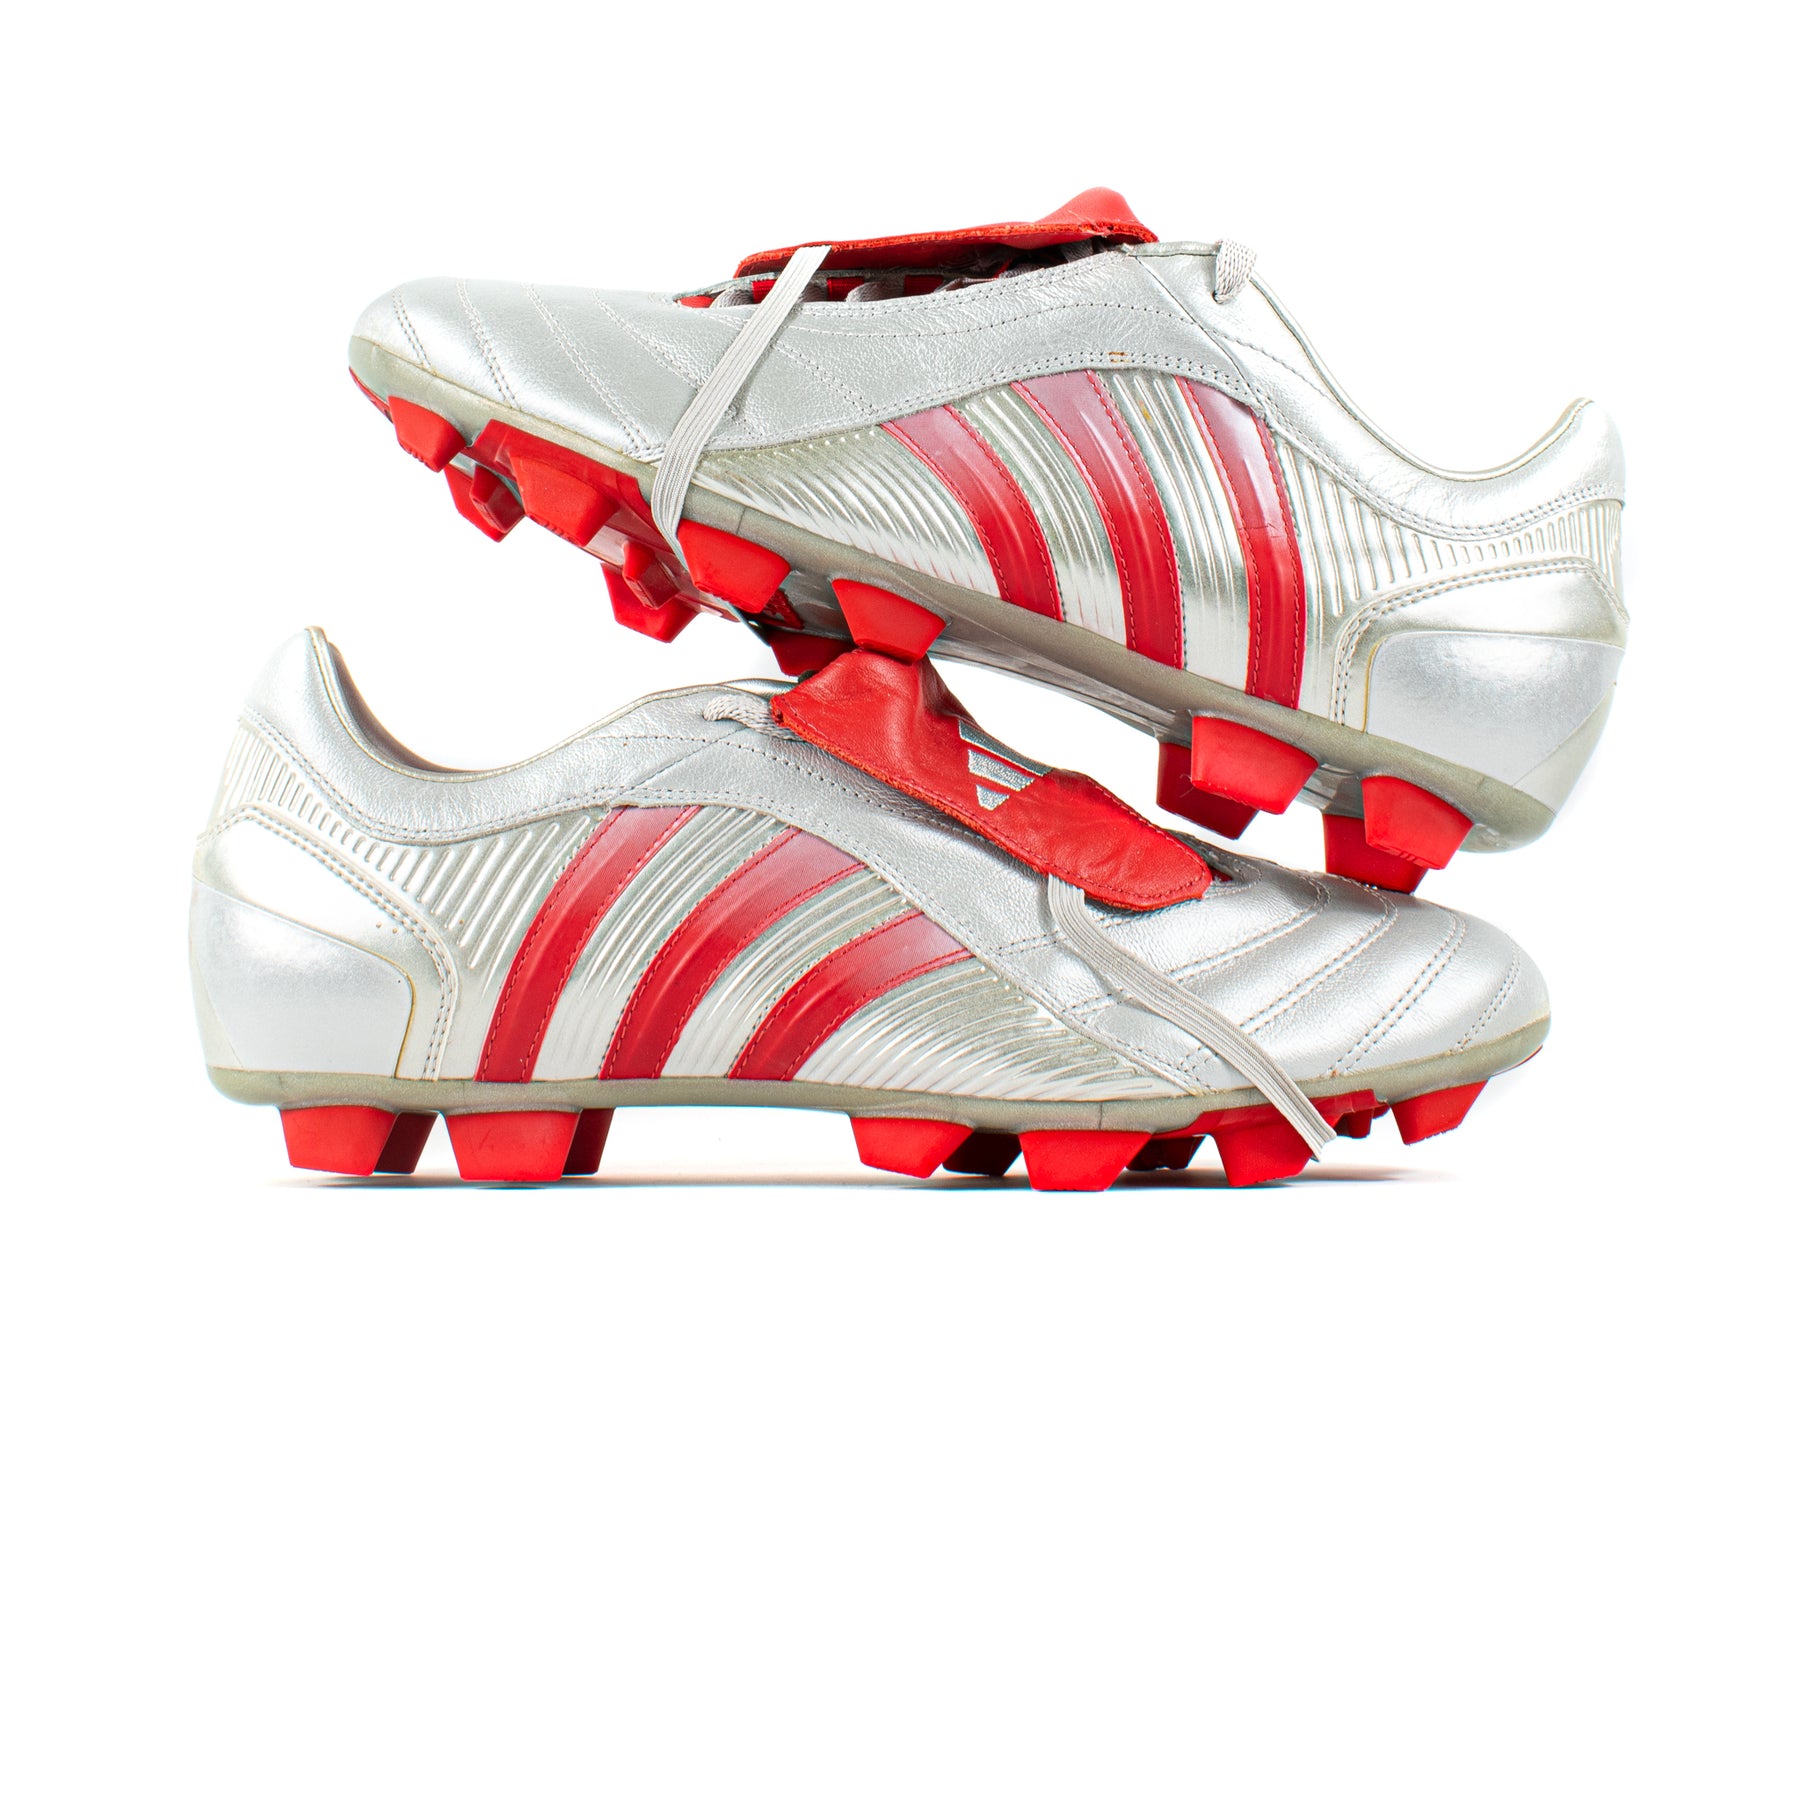 Adidas Predator Pulsion Silver Red FG – Classic Soccer Cleats